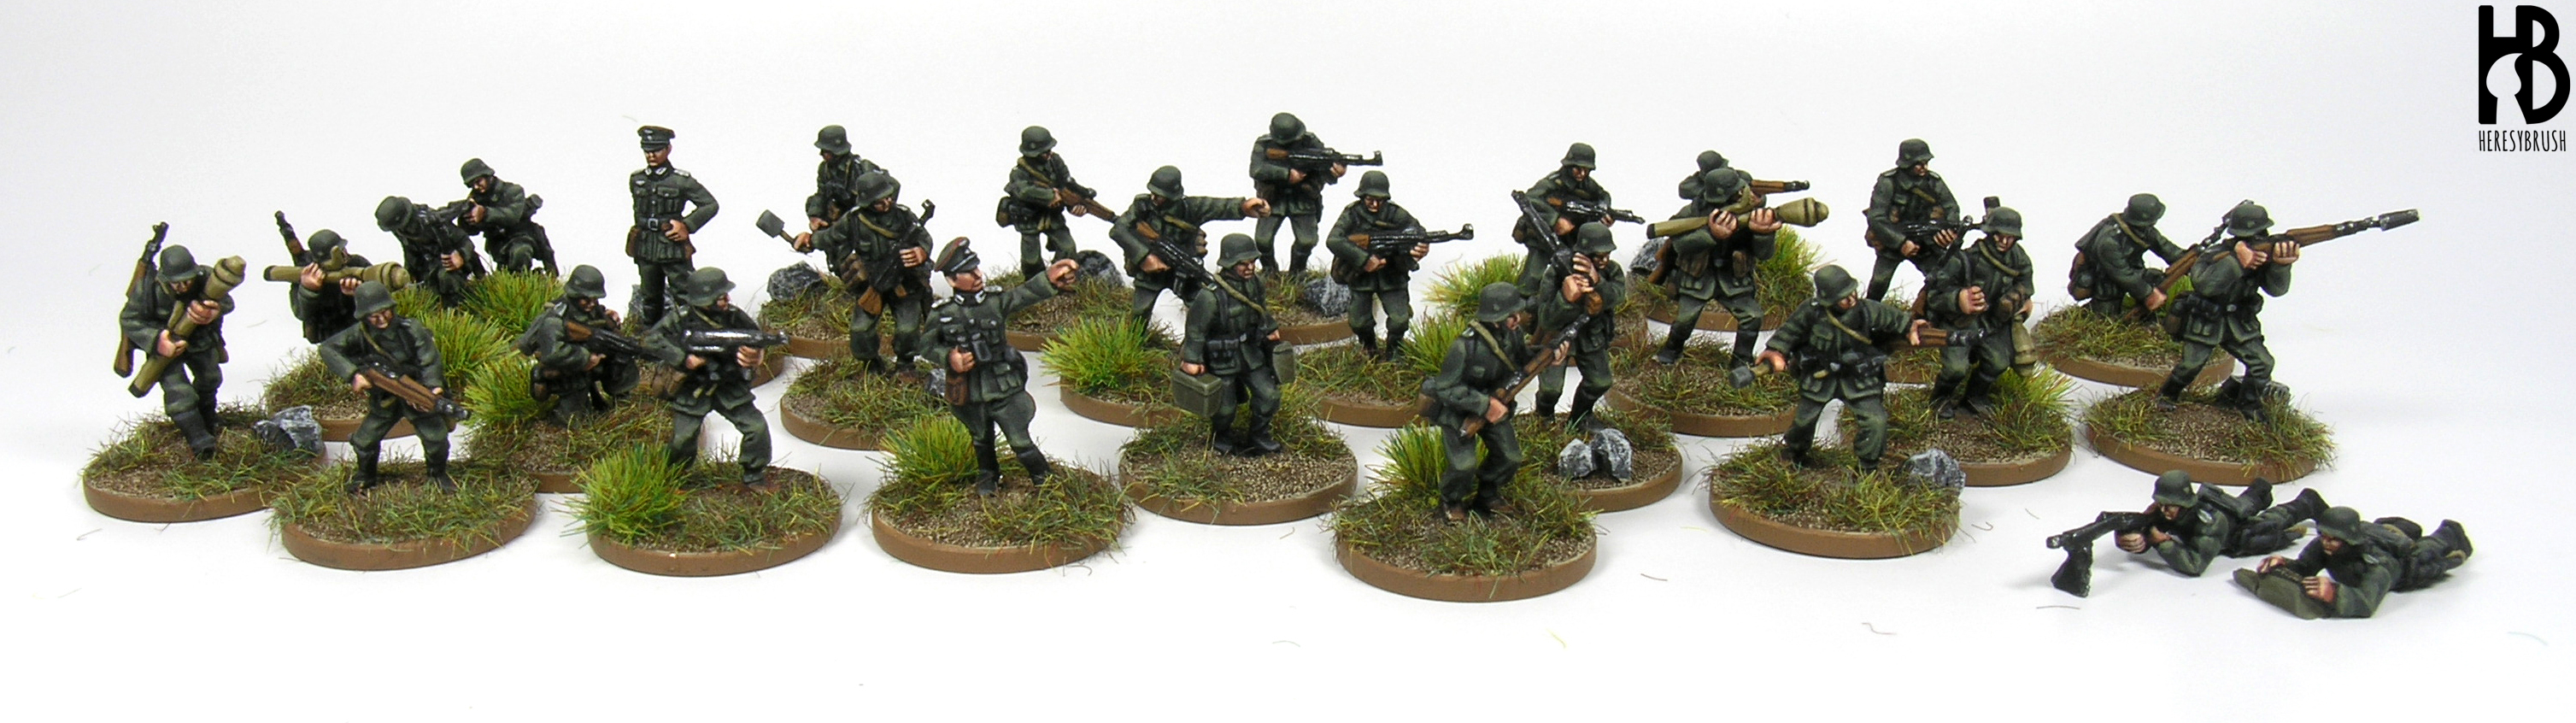 Come Dipingere L Uniforme Tedesca M43 Mid E Late War In 15mm Heresybrush